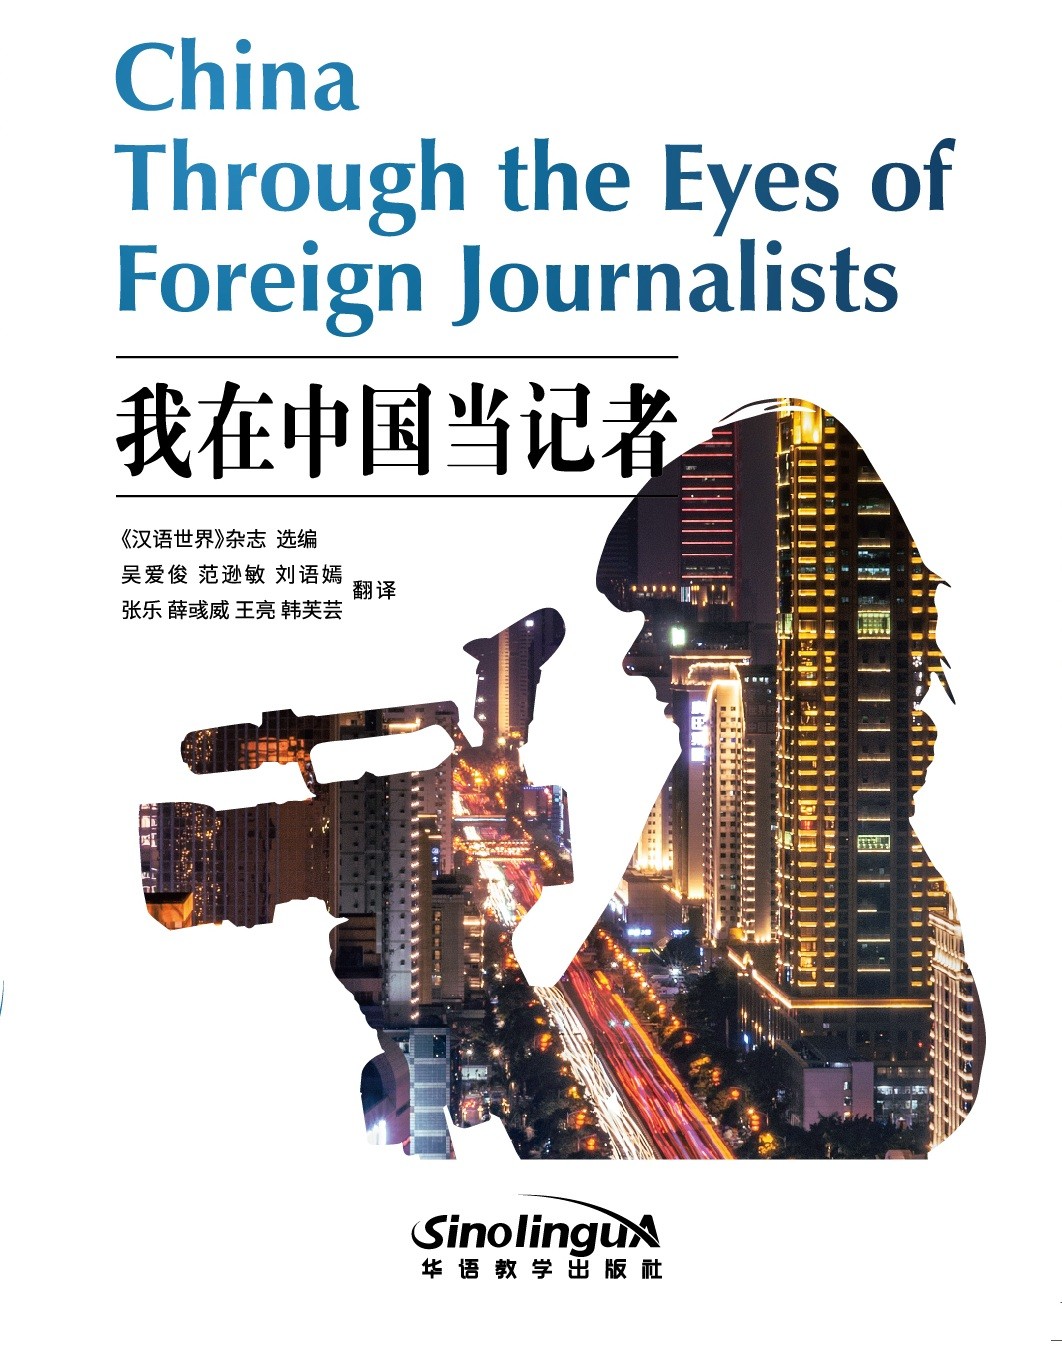 China through the eyes of foreign journalists